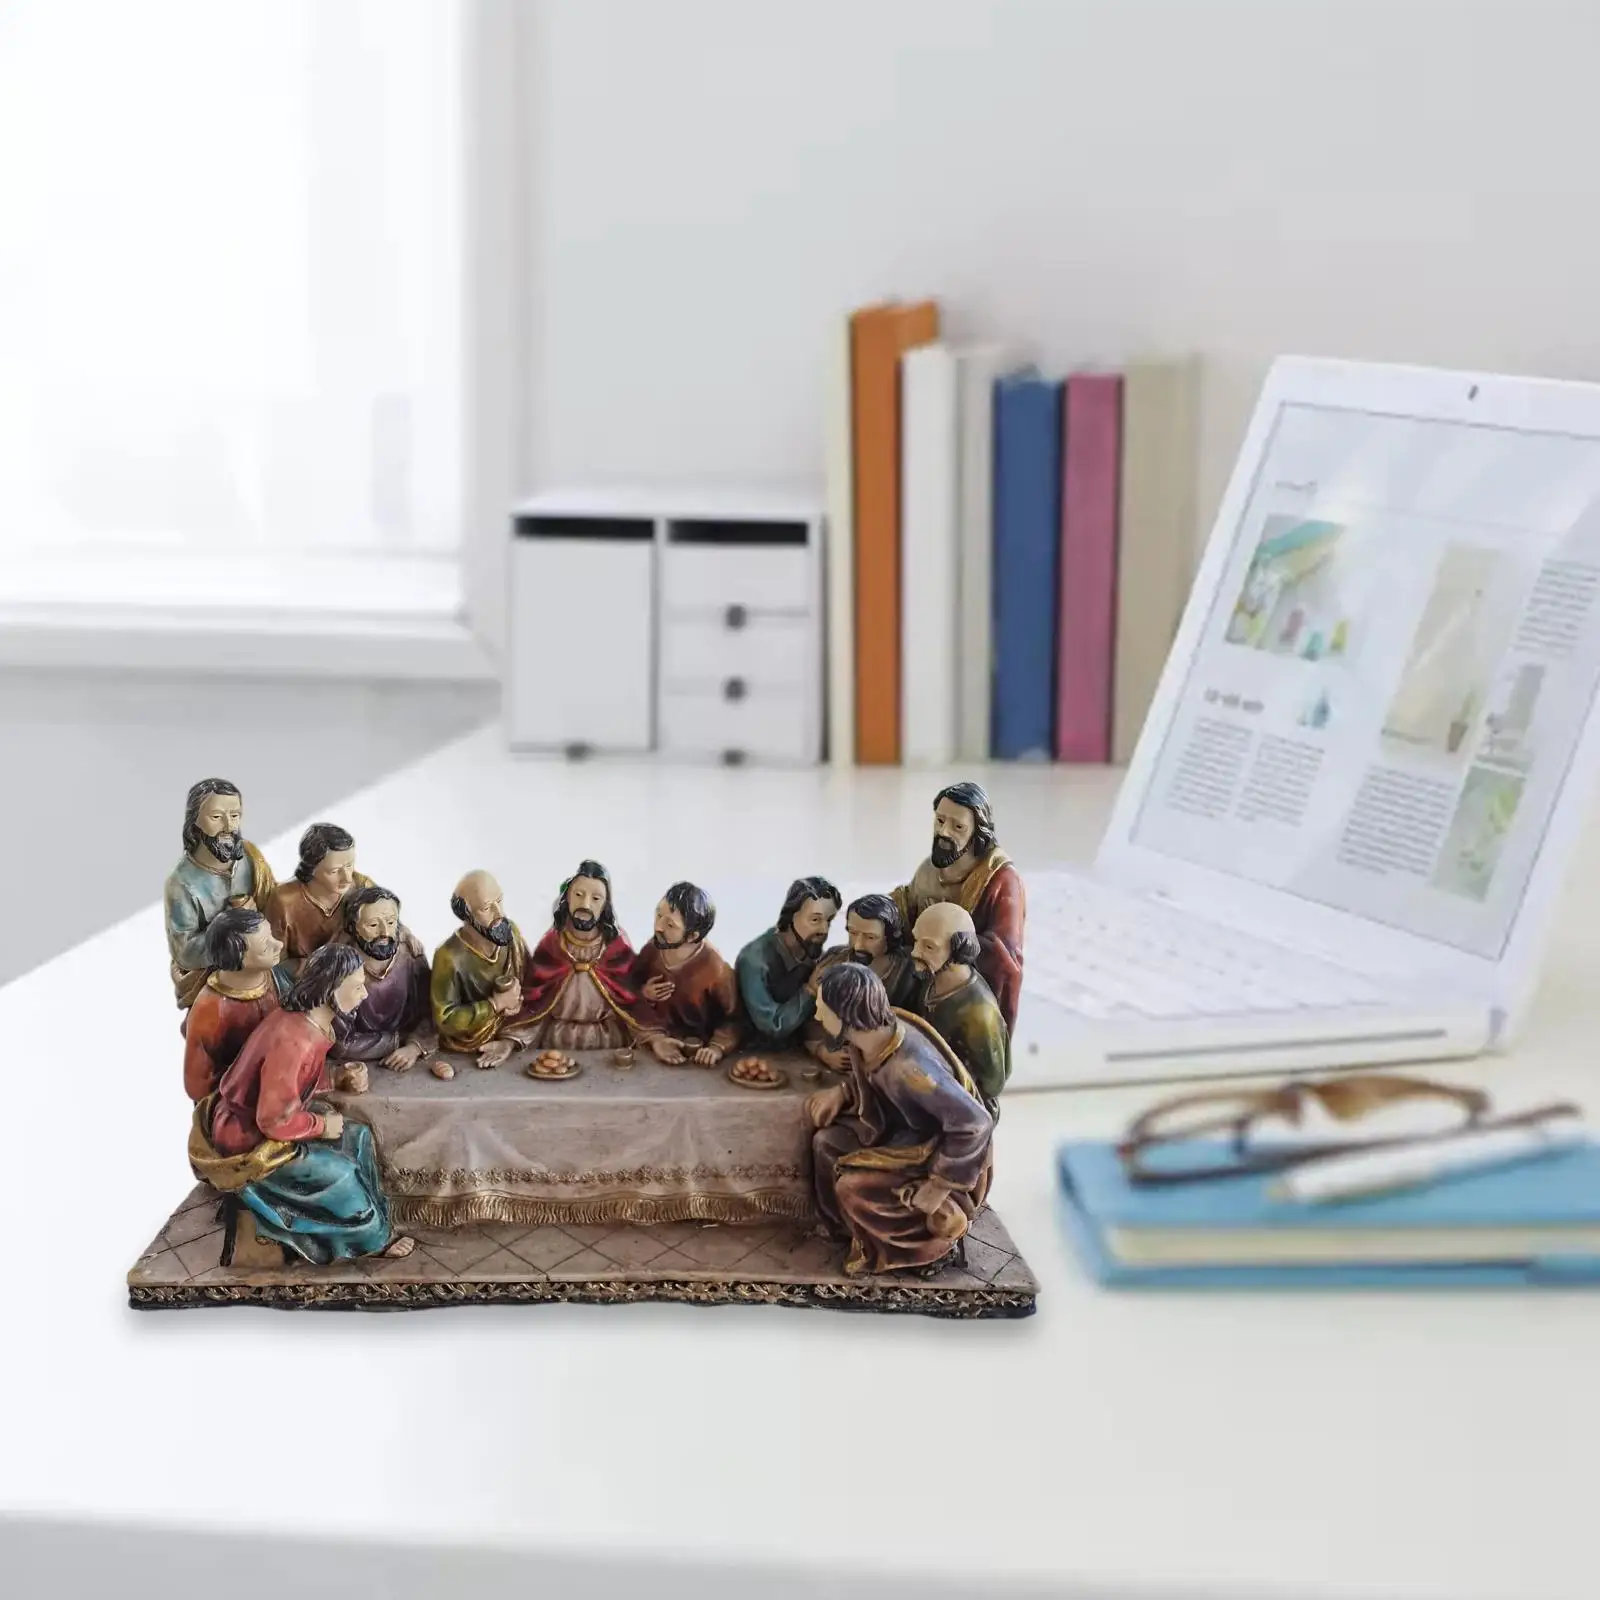 Resin The Decorative Statue of The Last Supper for Home Decorations